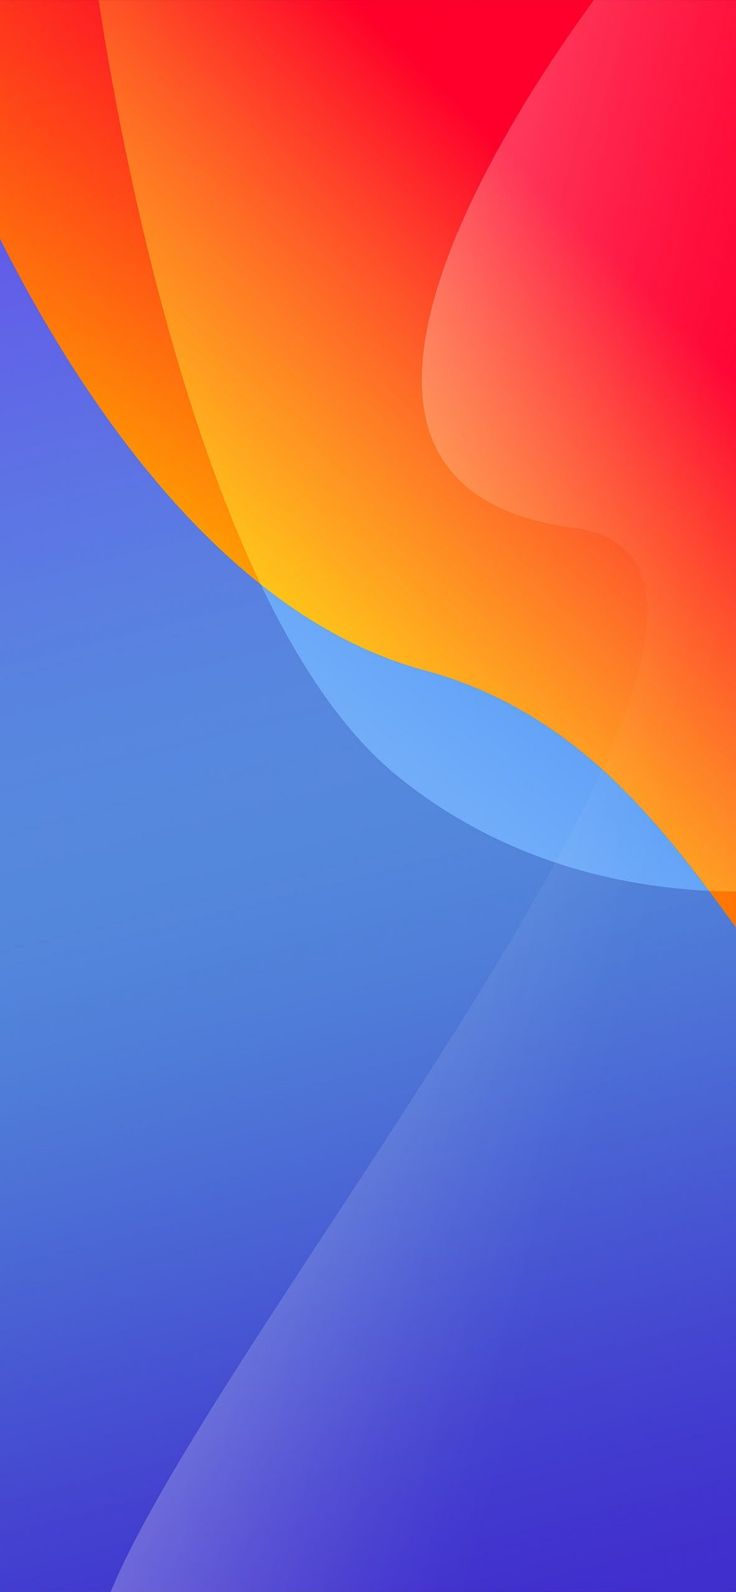 Free download Blue to orange new gradient by Hk3ToN on Oneplus ...